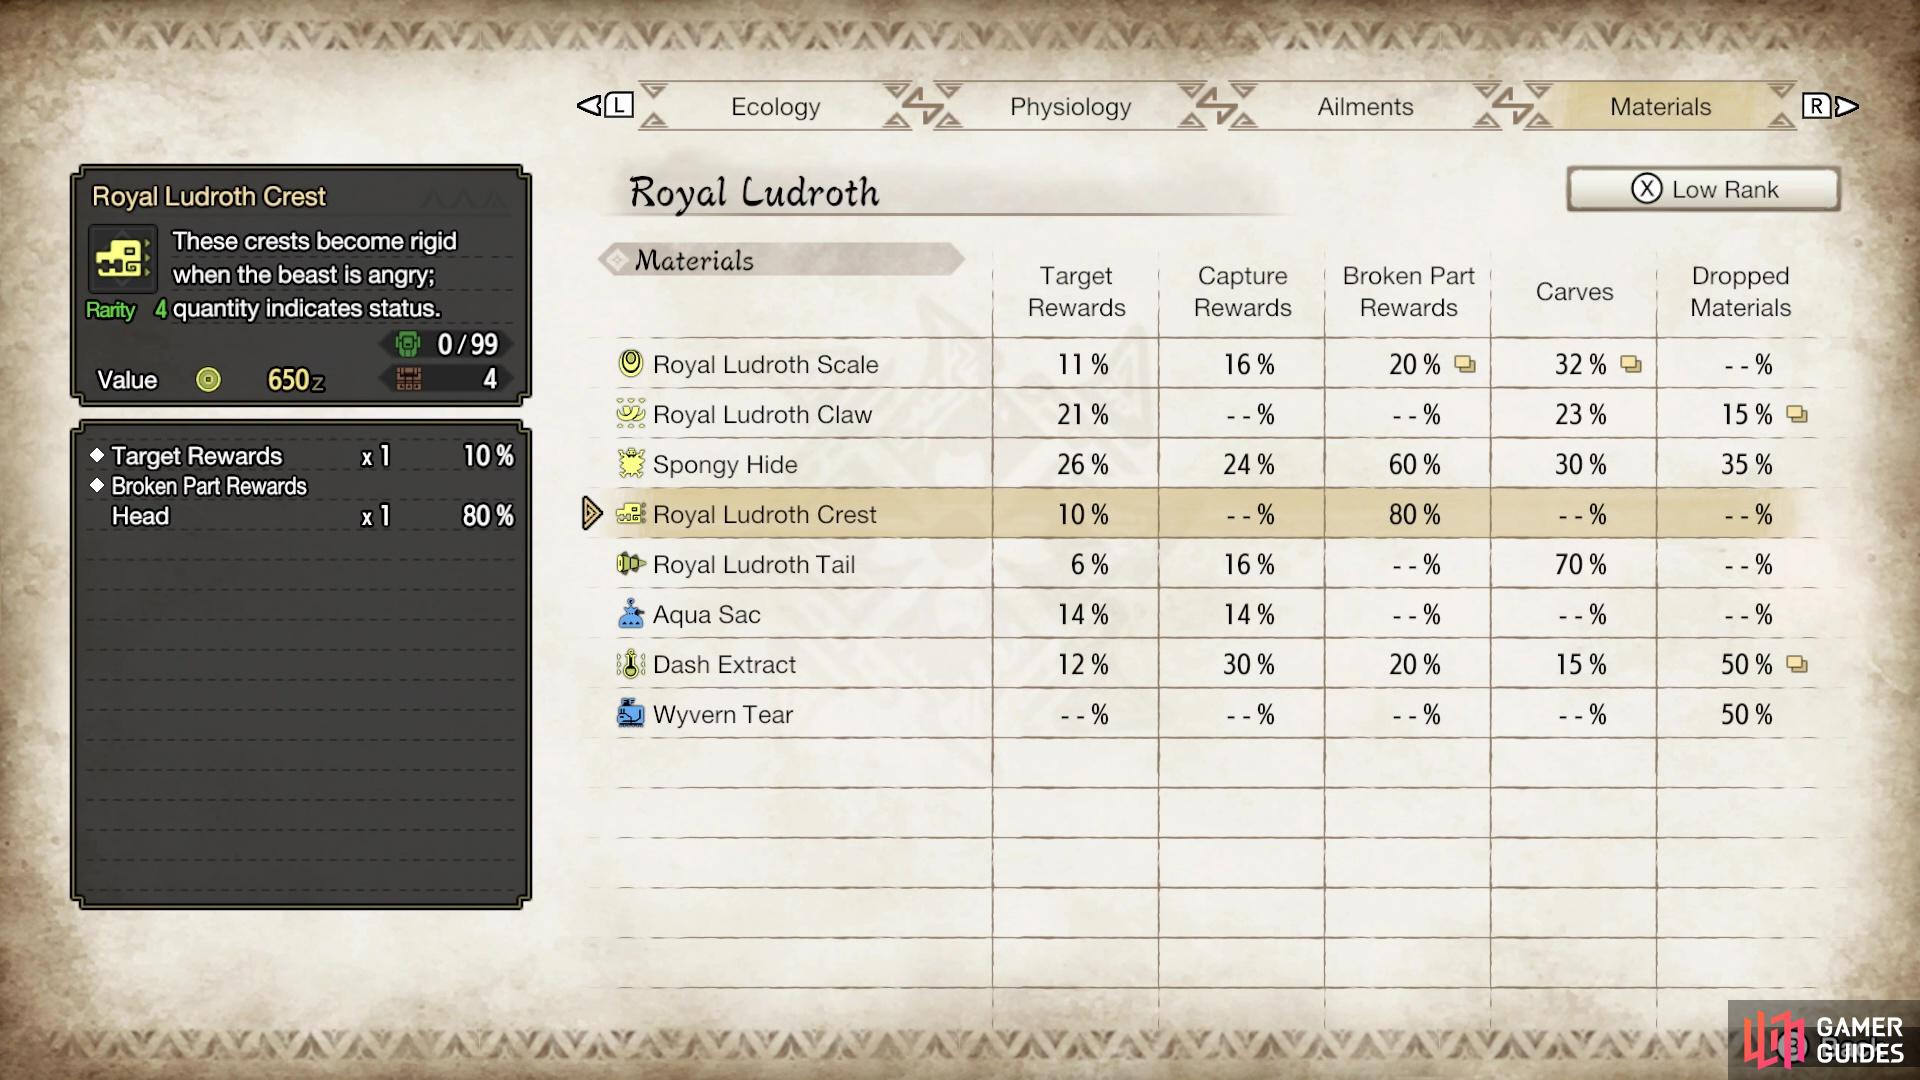 The Royal Ludroth Crest is obtained from the Royal Ludroth.